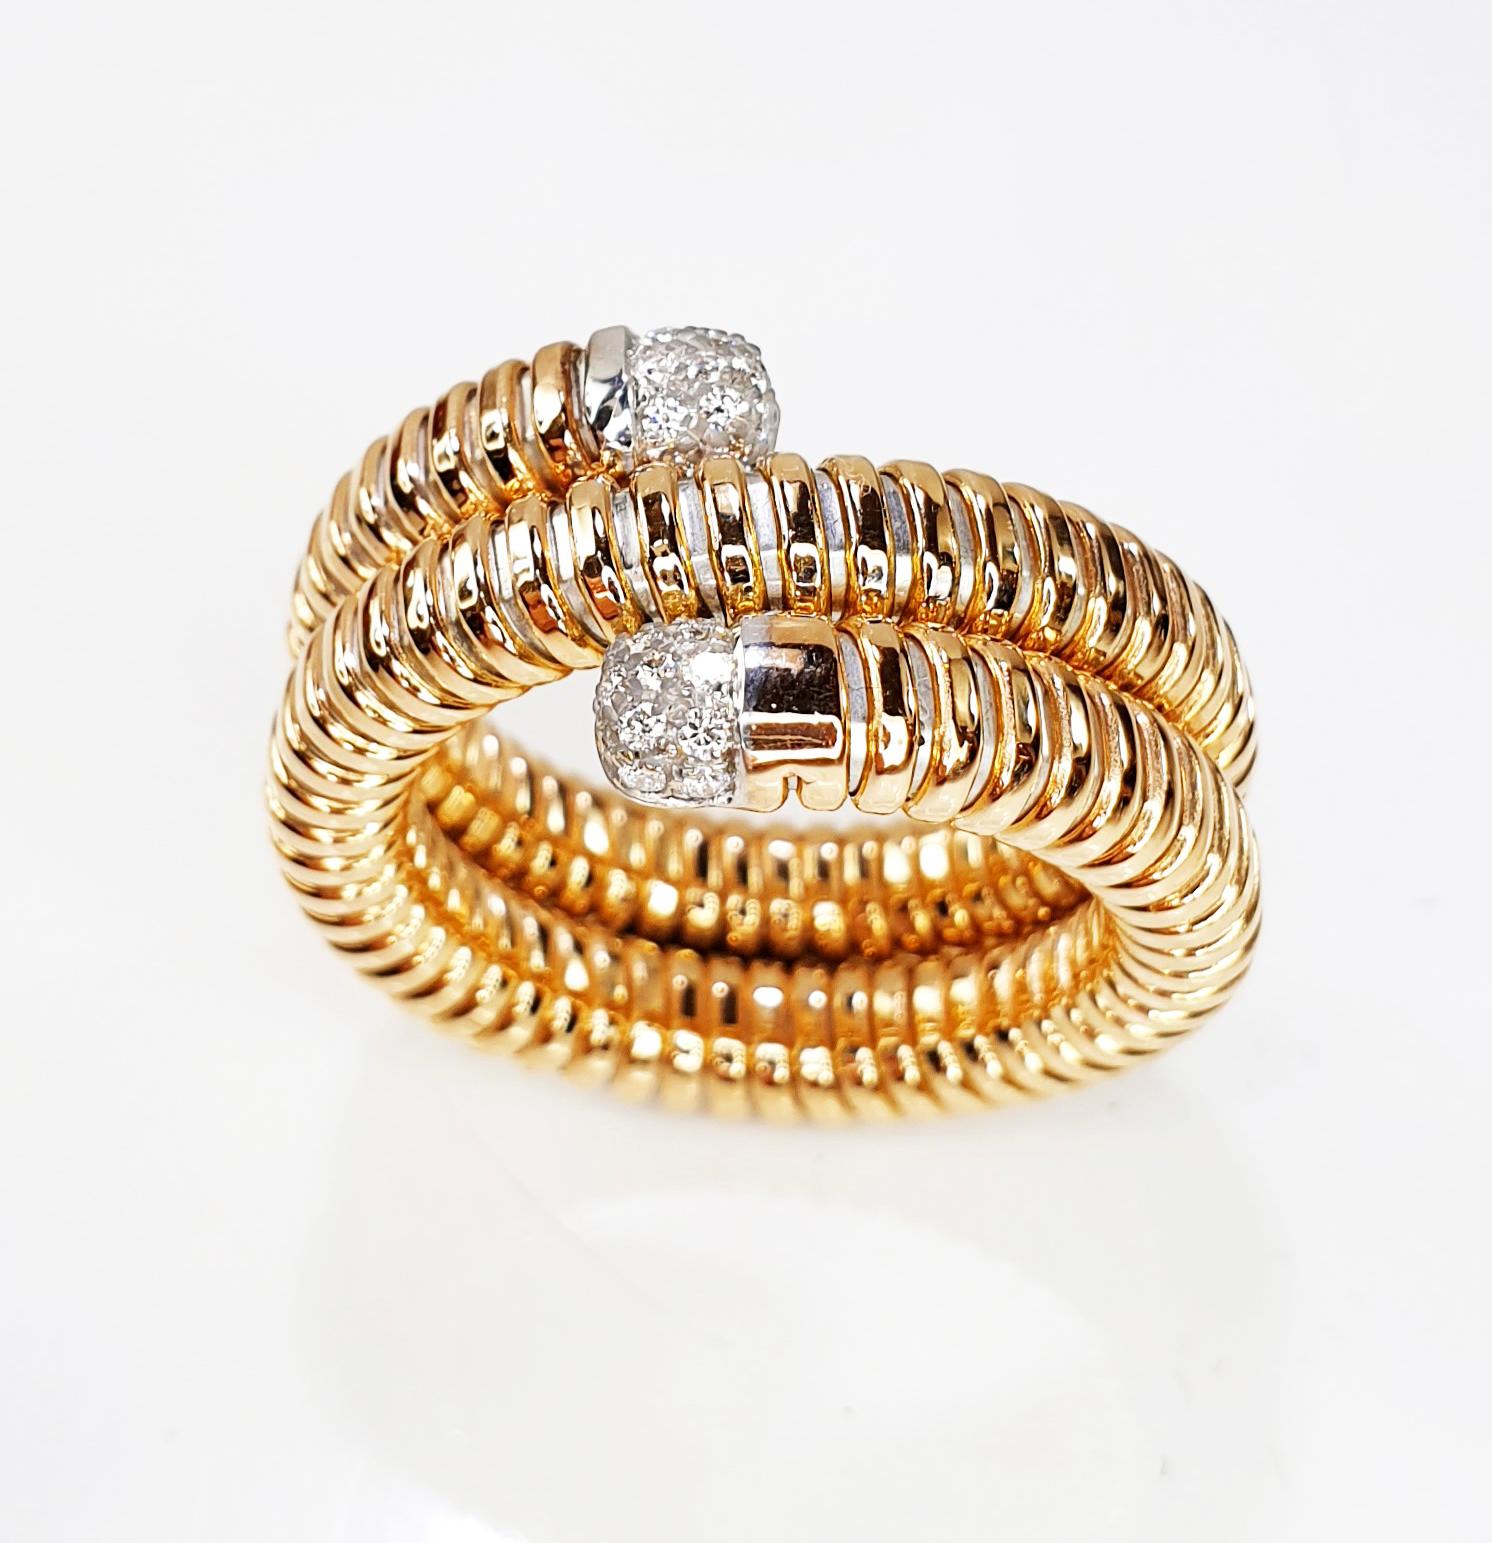 Flexible and adaptable ring with tubogas craftmanship that fits medium to large sizes.
Available in three colours of gold, yellow, white and rose.
11,40gr and 0.25Carat Diamonds
Request availability if in stock 5 days handling time
If not in stock